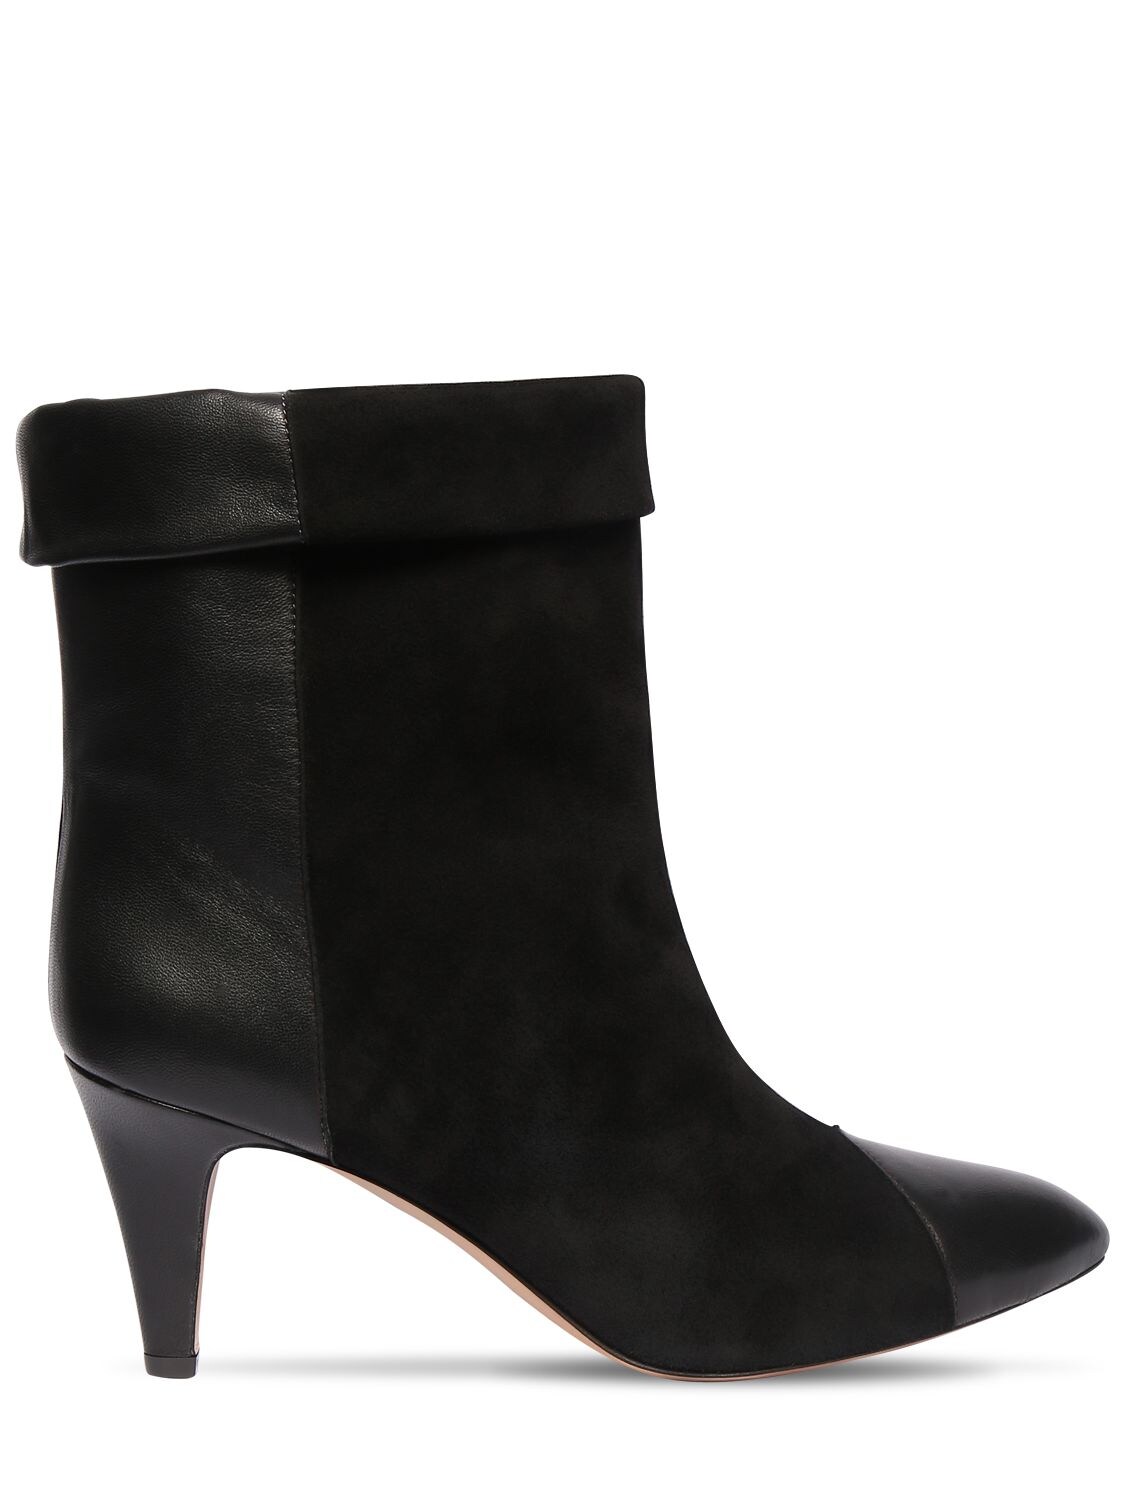 ISABEL MARANT 75MM DAEL SUEDE & LEATHER ANKLE BOOTS,72IE1C006-MDFCSW2